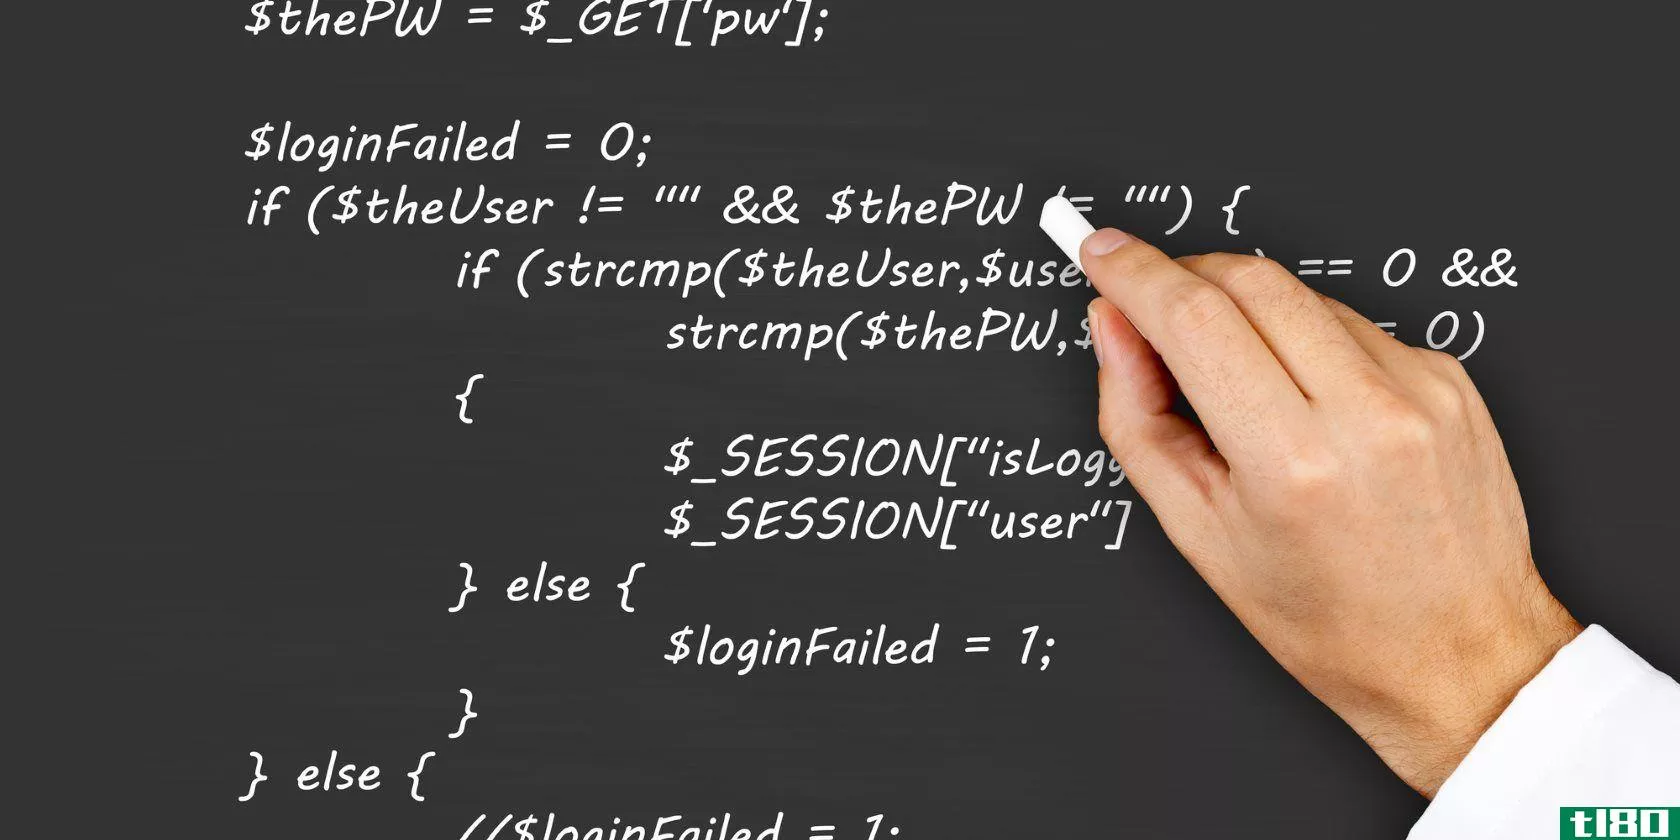 teacher-or-scientist-writing-php-source-code-from-webpage-on-blackboard